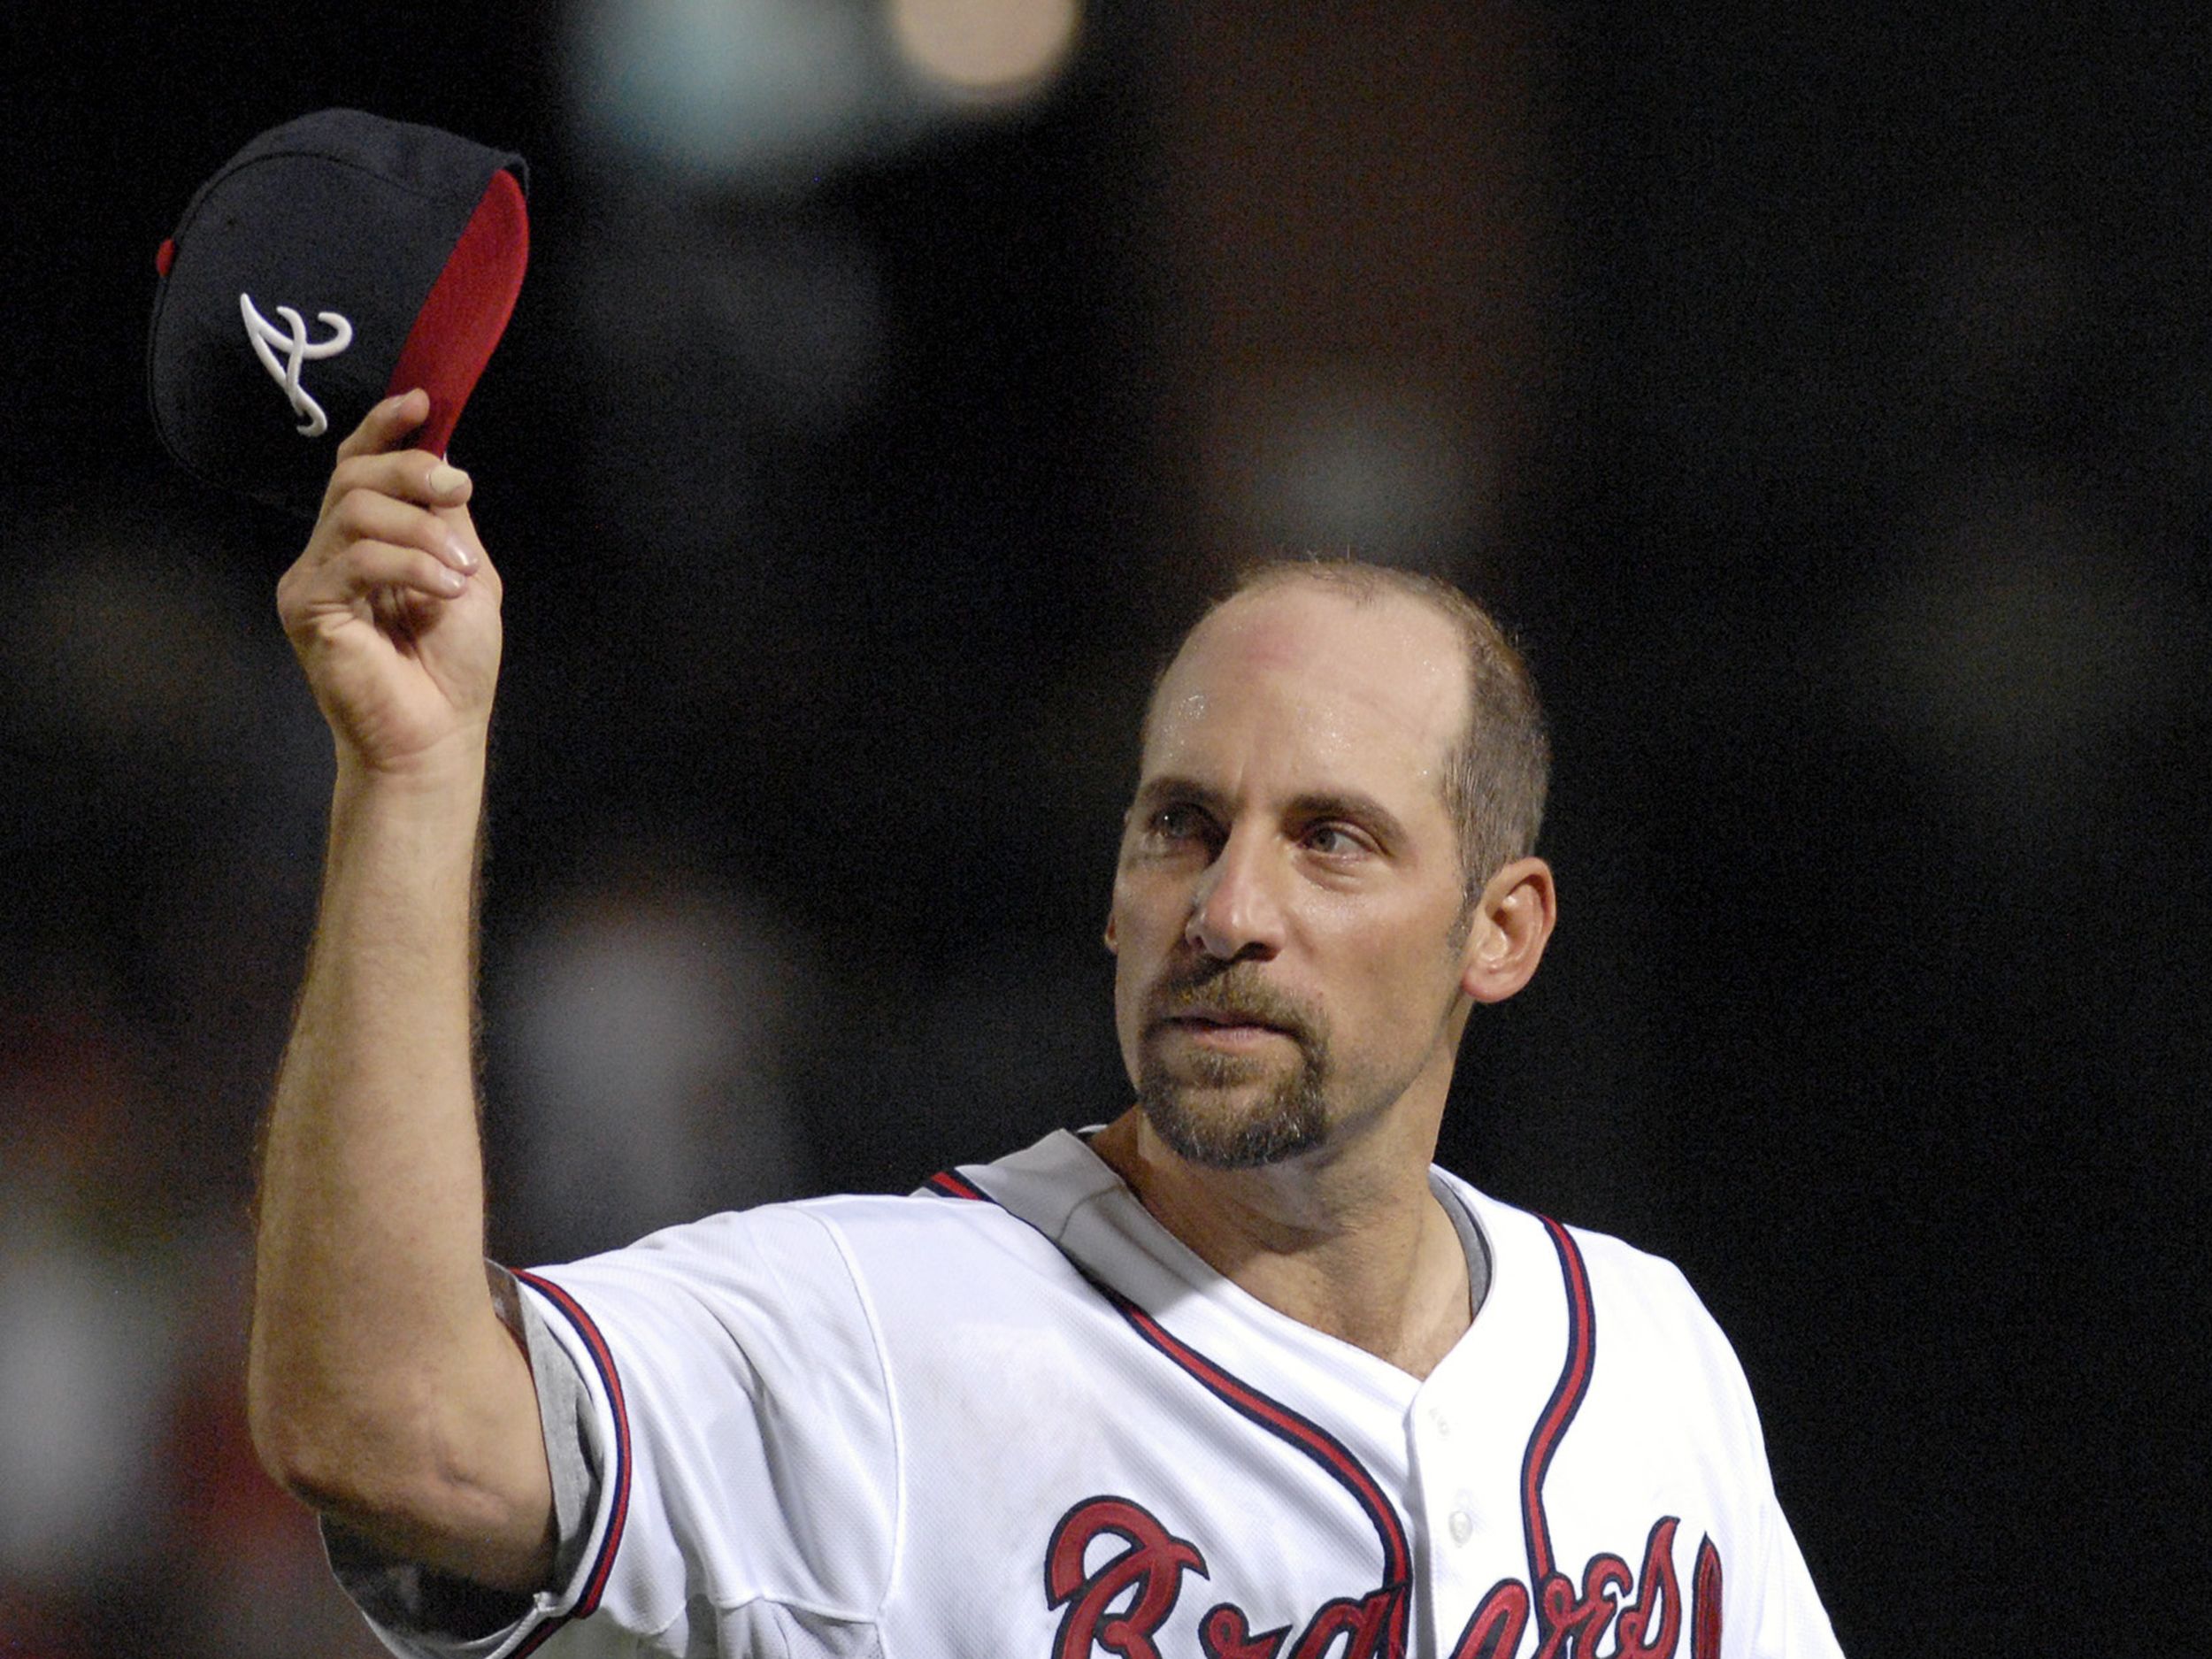 John Smoltz enters Hall of Fame with important message about Tommy John  surgery